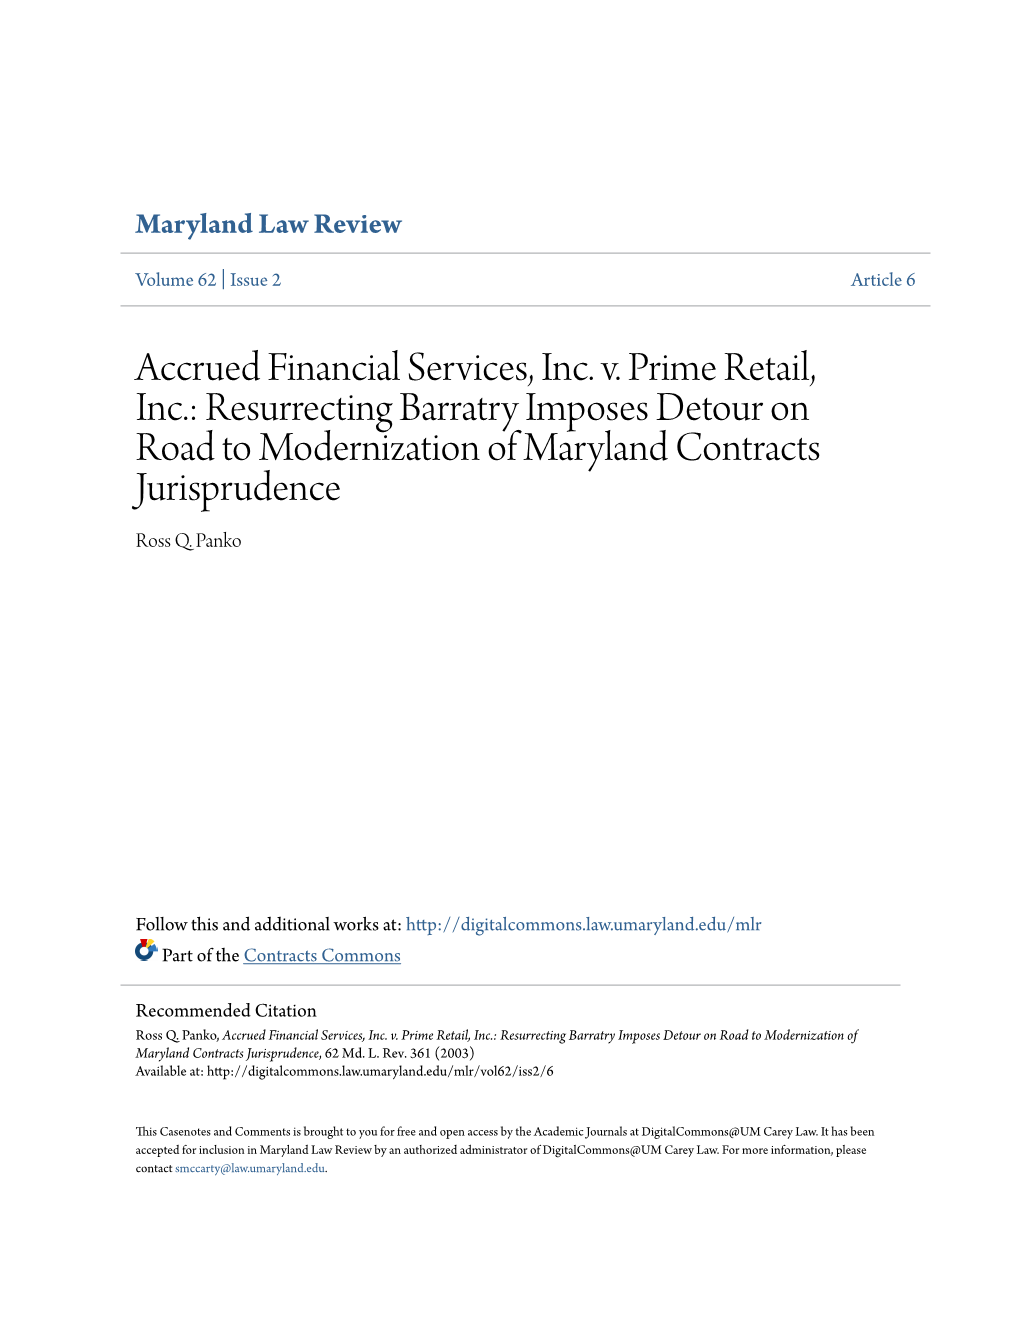 Accrued Financial Services, Inc. V. Prime Retail, Inc.: Resurrecting Barratry Imposes Detour on Road to Modernization of Maryland Contracts Jurisprudence Ross Q